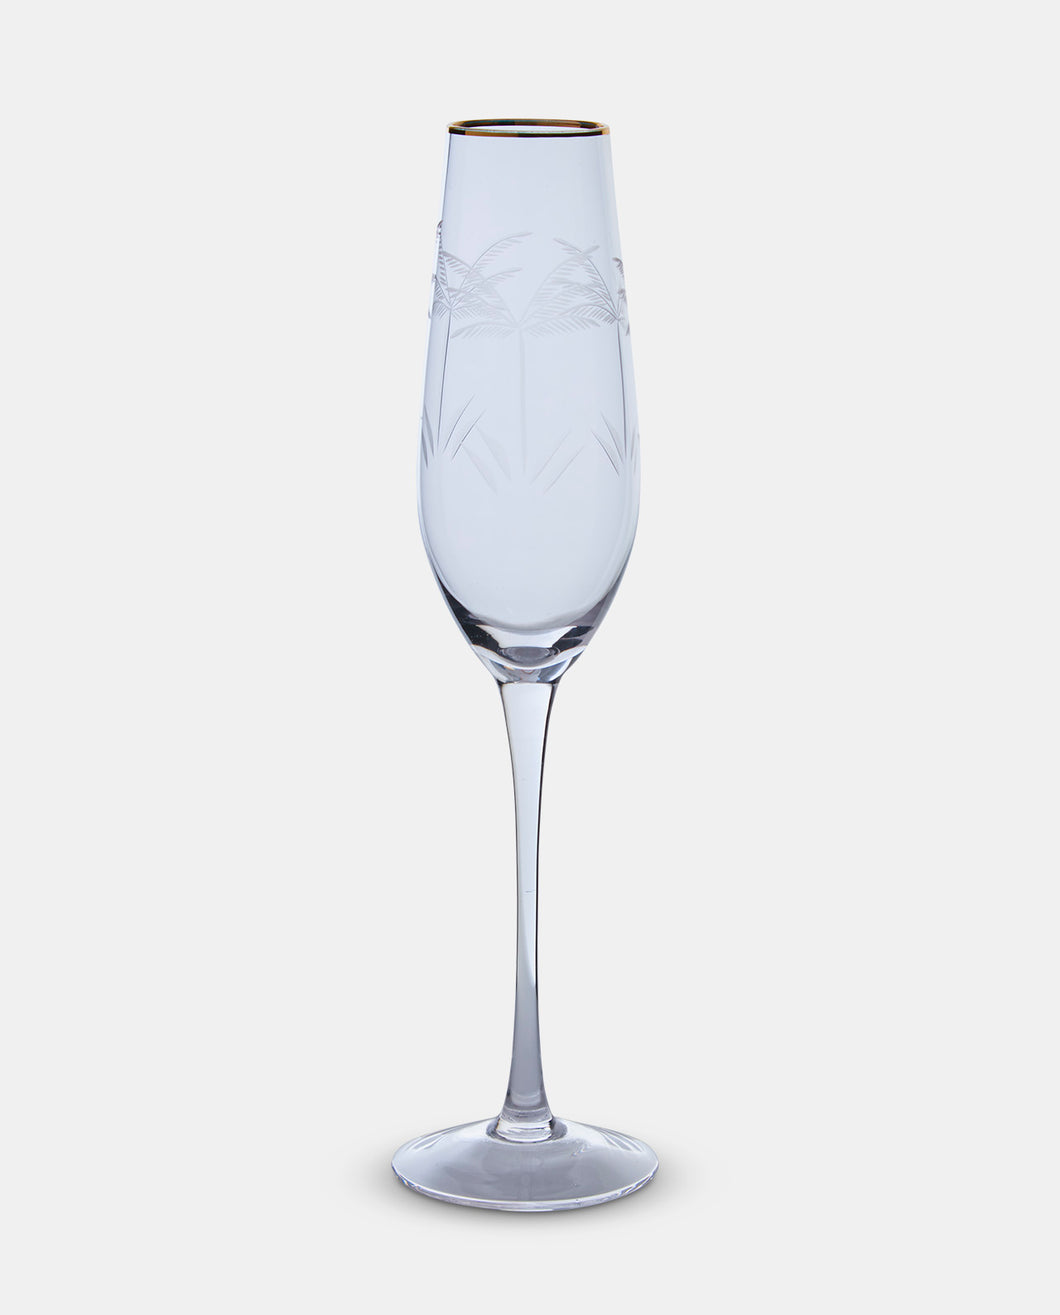 Etched Gold Rim Champagne Flute